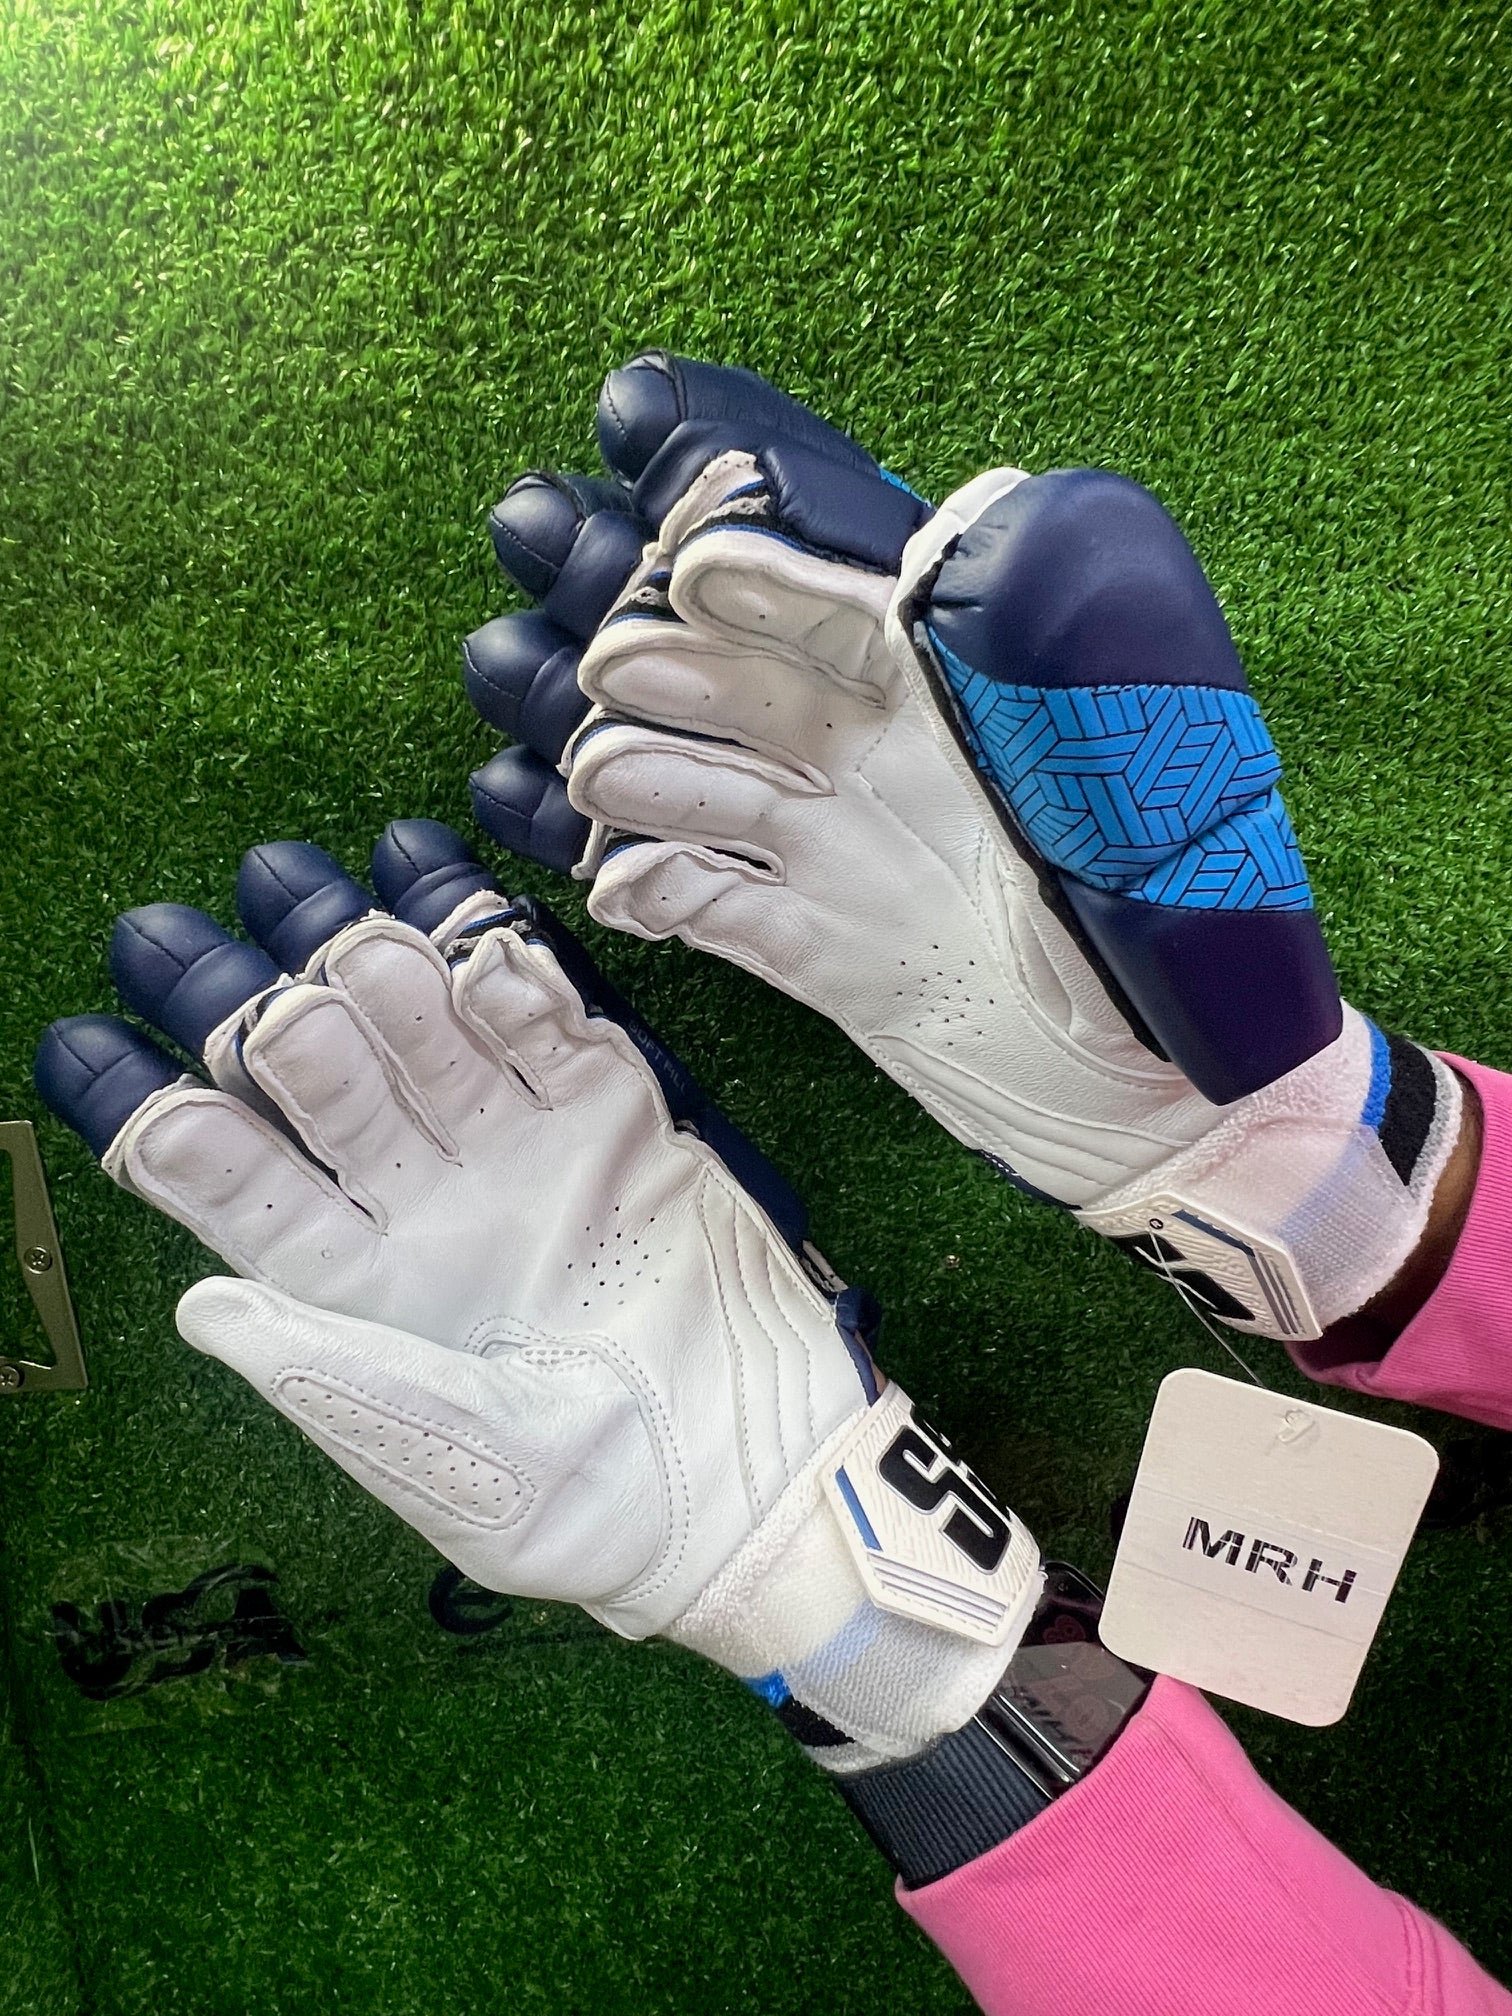 SS Super Test Navy and Sky Colored Batting Gloves - 2024